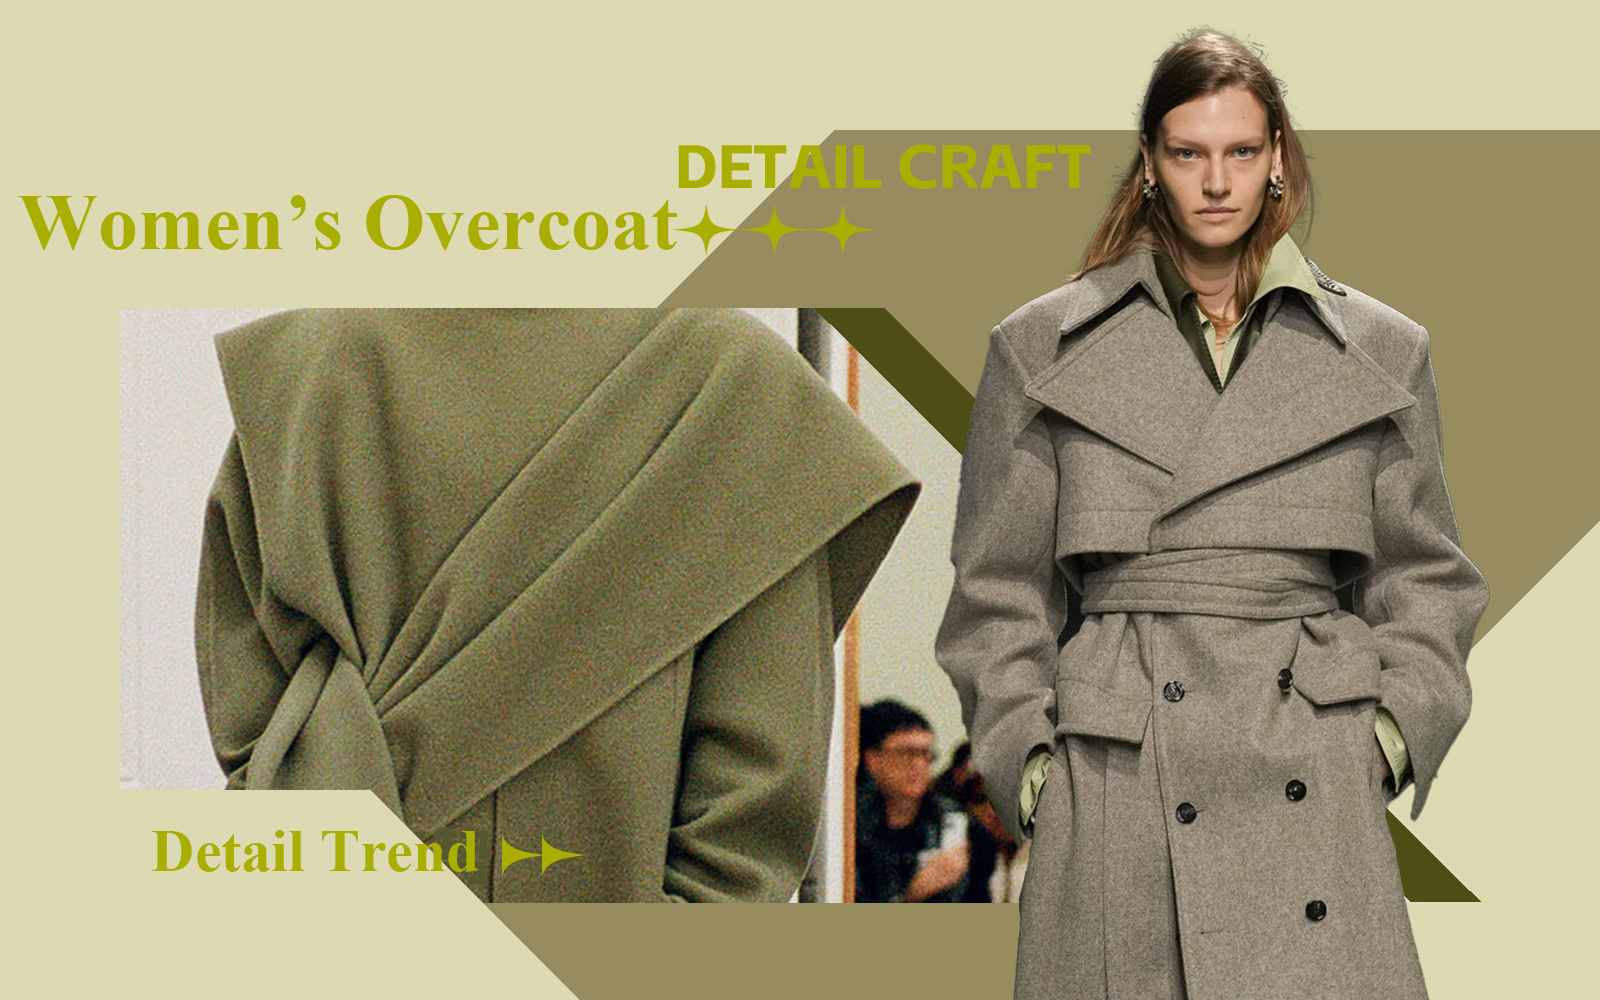 The Detail & Craft Trend for Women's Overcoat